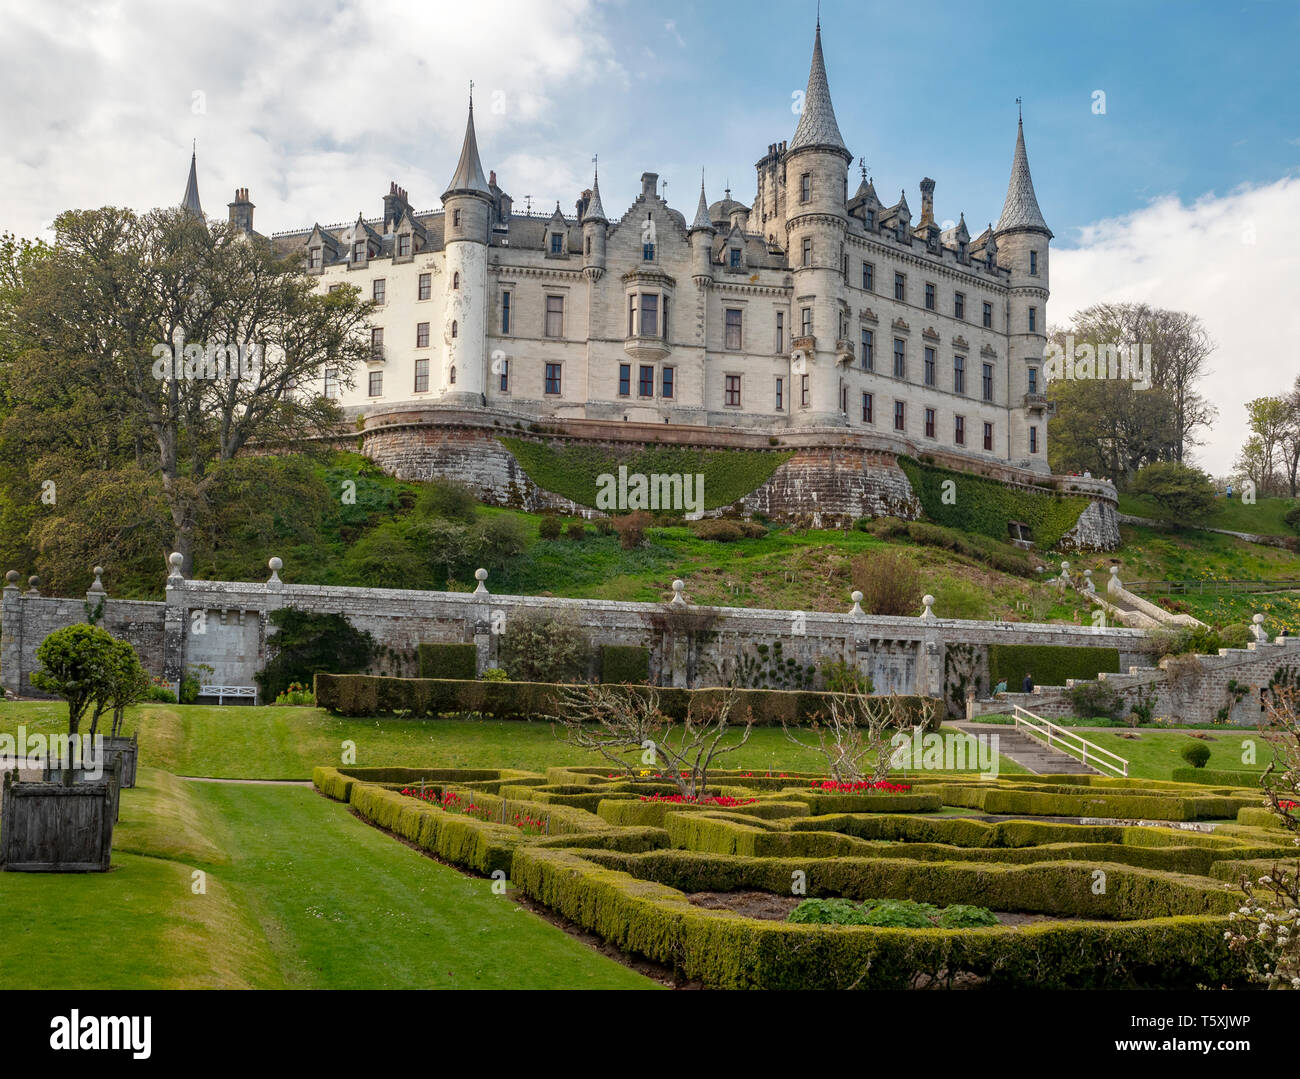 View of Dunrobin Castle, Scotland, from the Gardens Stock Photo